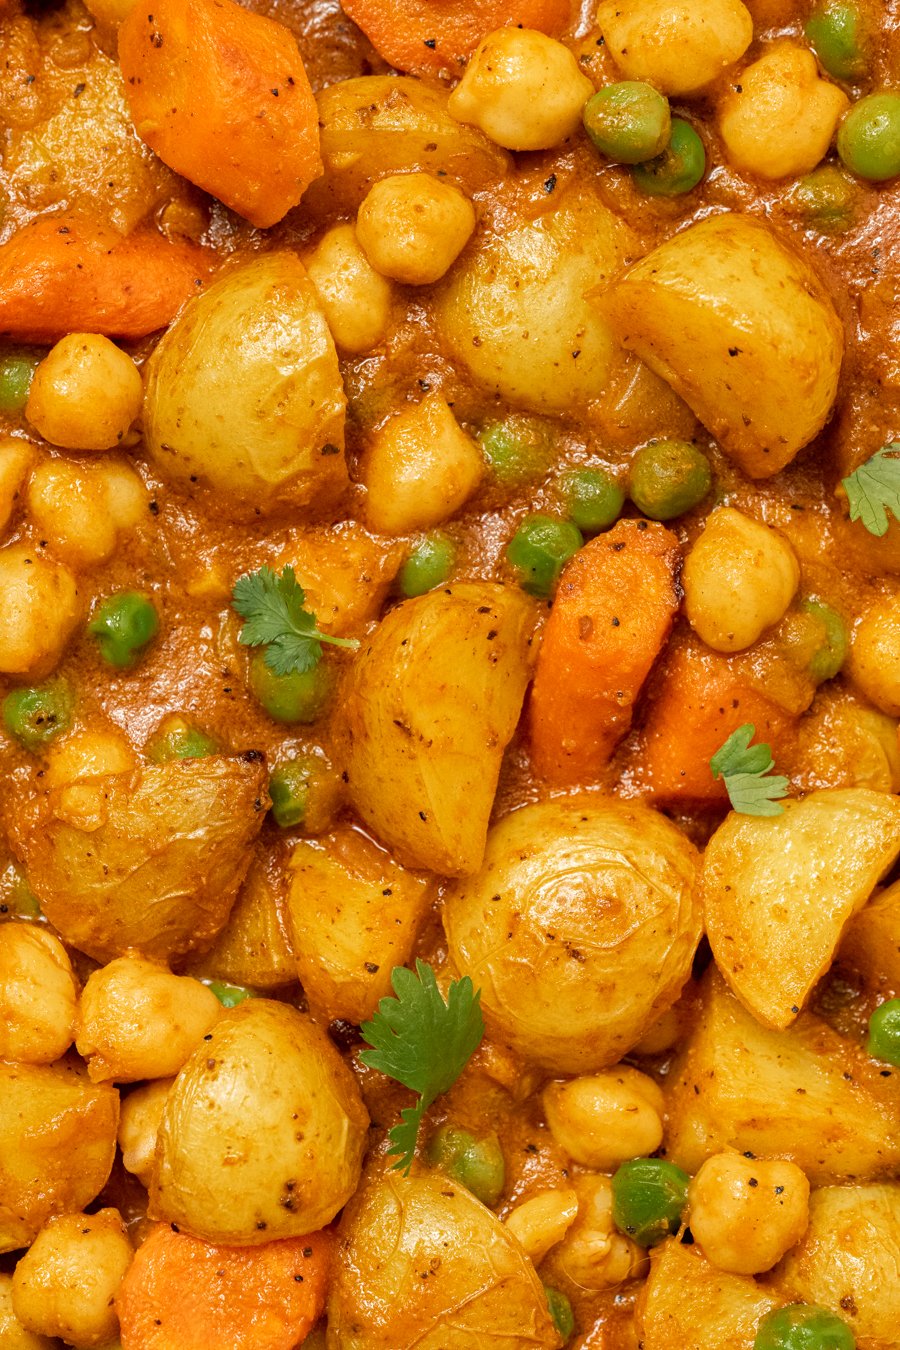 Carrot and Potato Chickpea Curry with Lentils